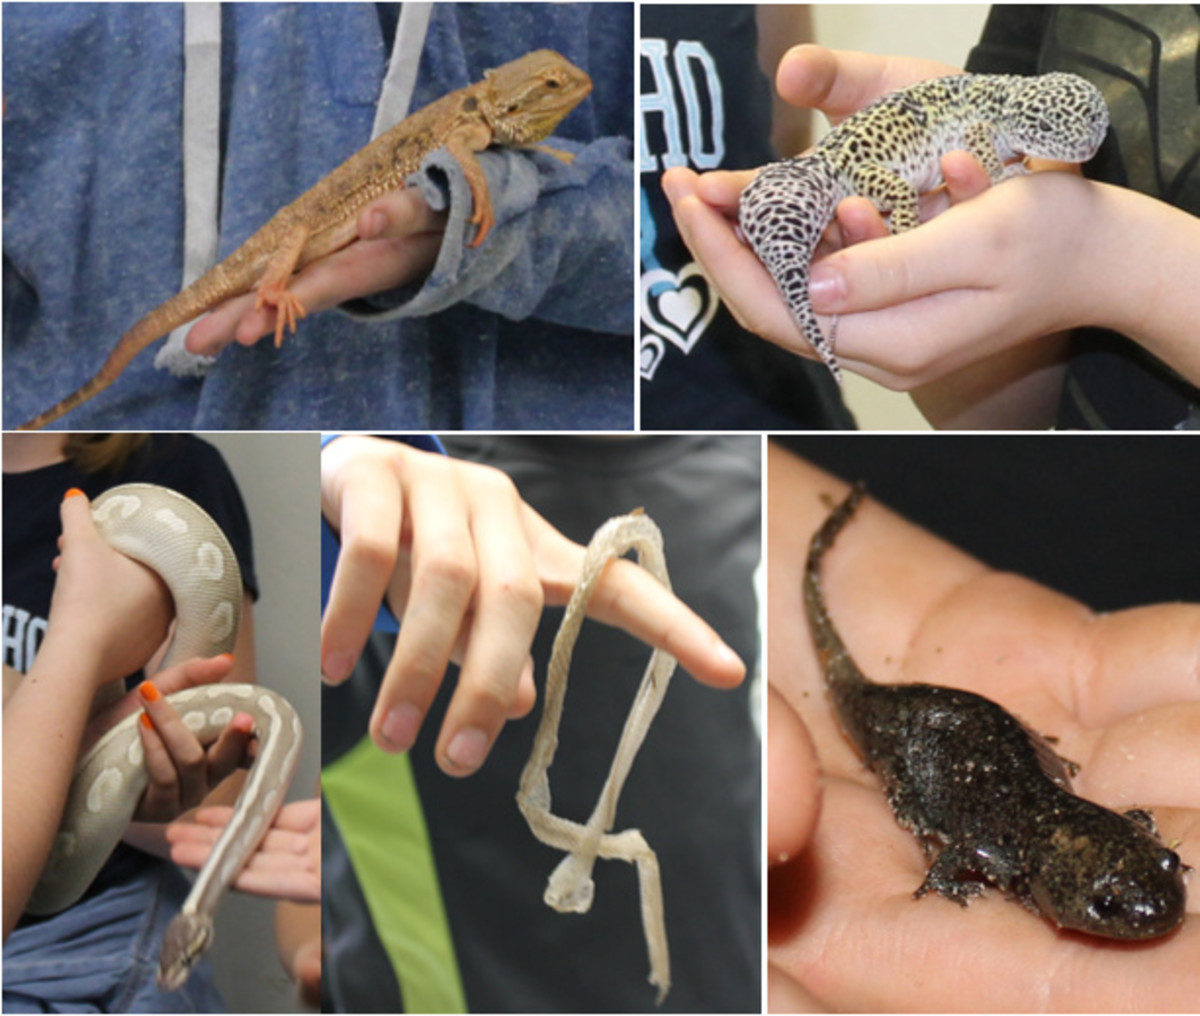 Some of the reptiles and reptile items shown in class